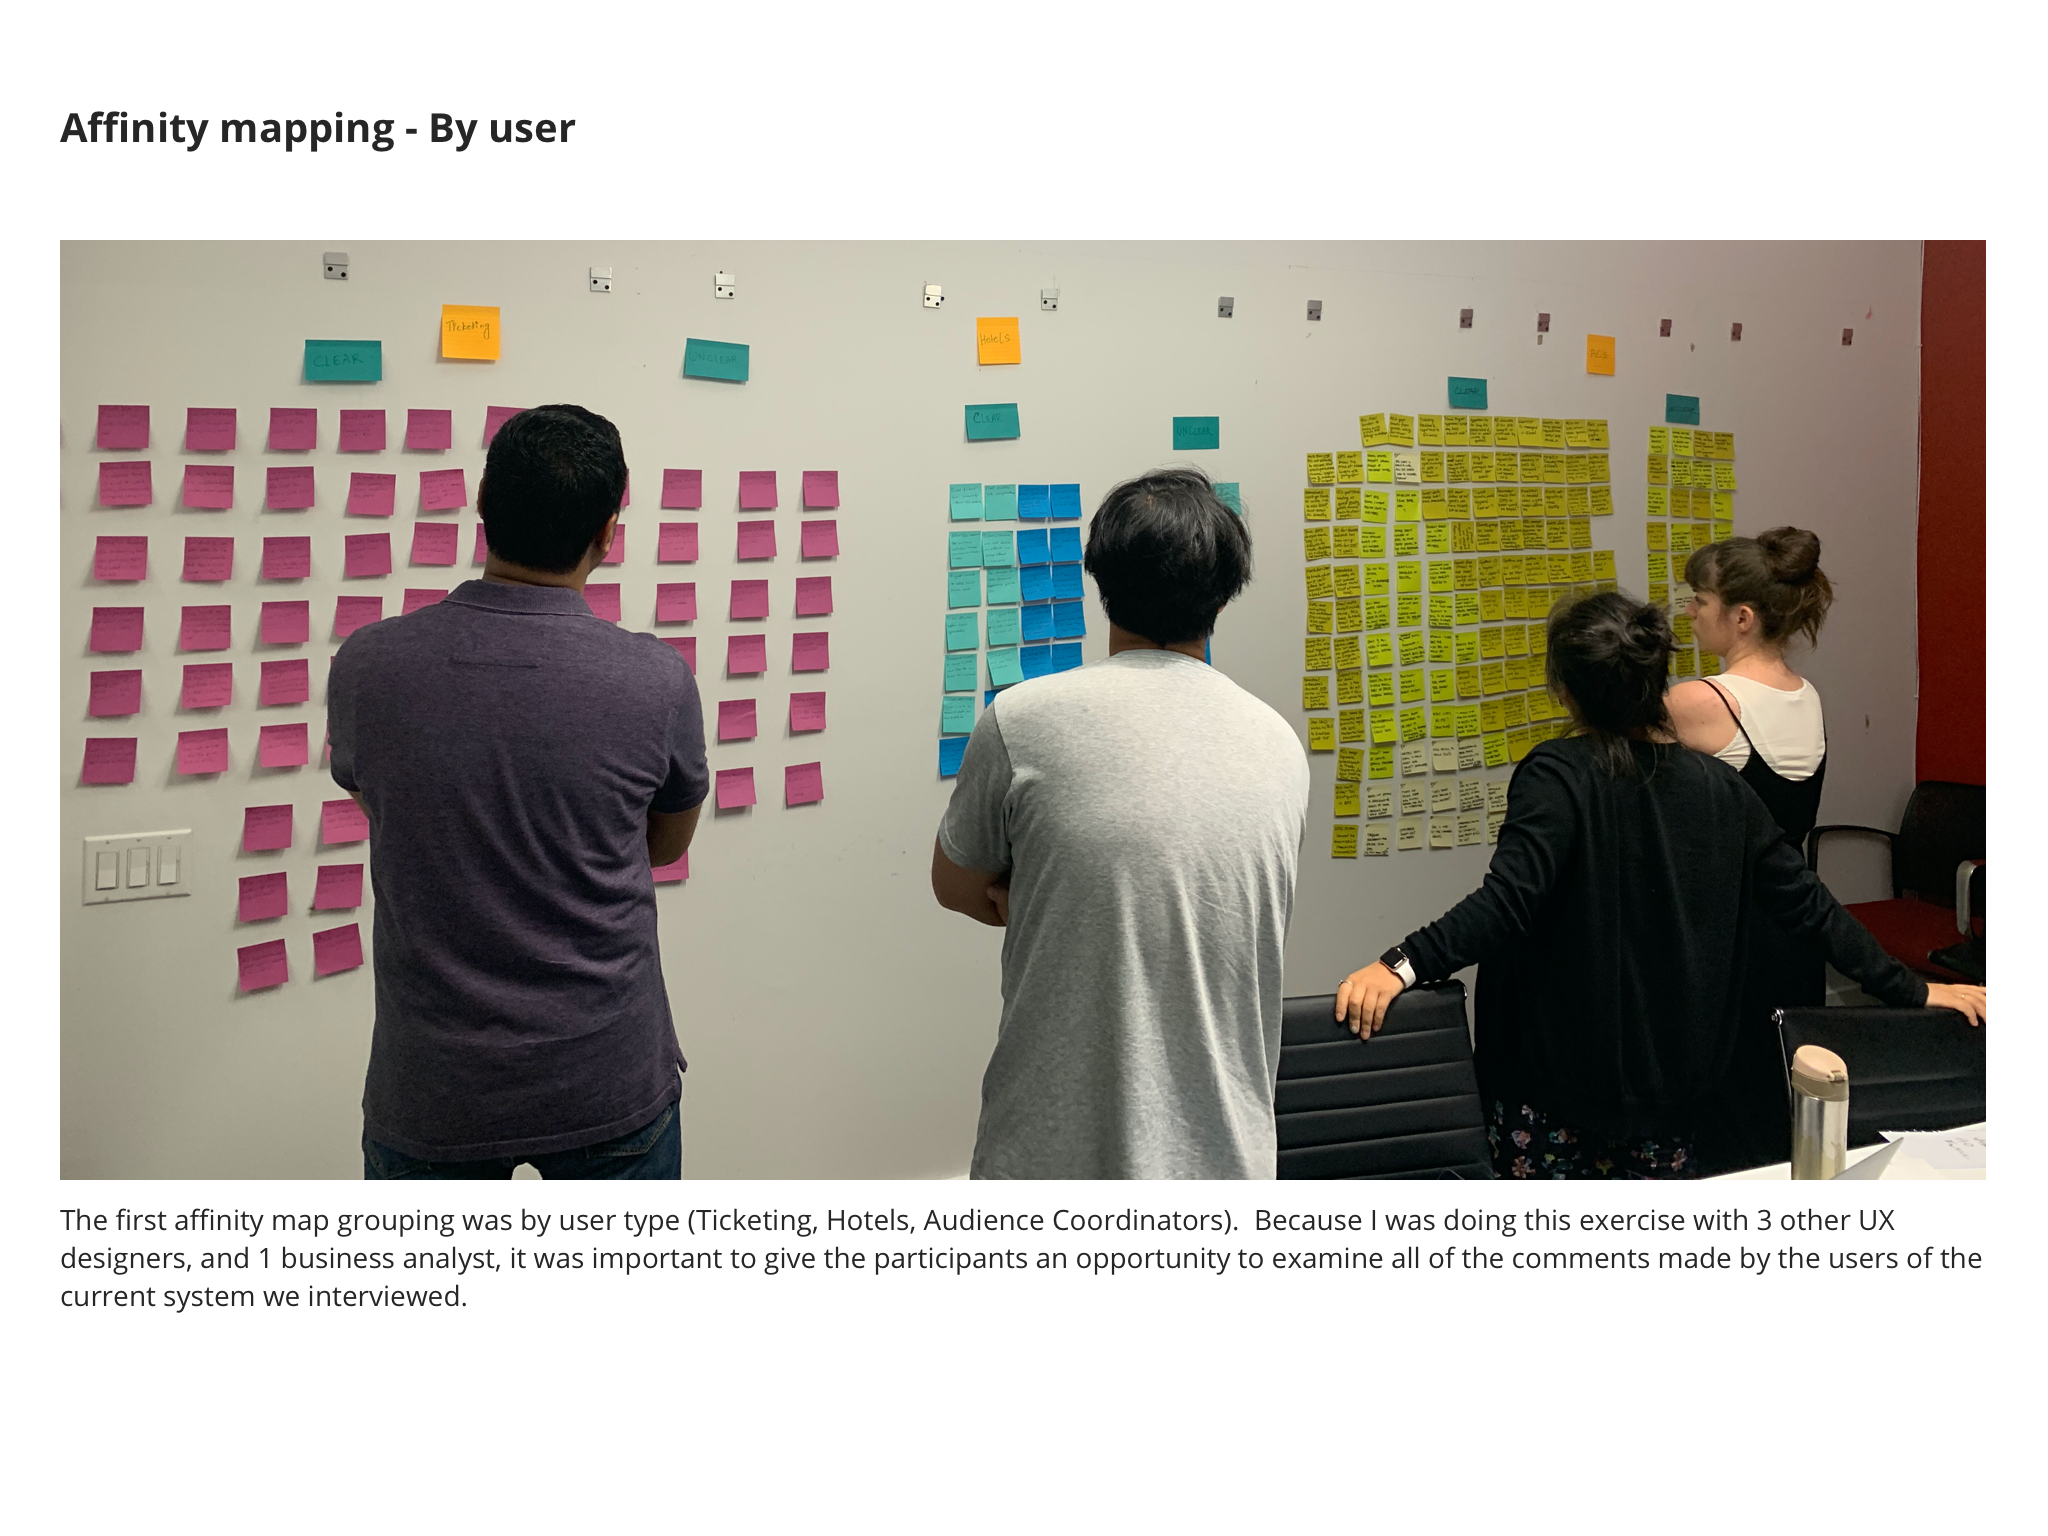  The first affinity map grouping was by user type (Ticketing, Hotels, Audience Coordinators). Because I was doing this exercise with 3 other UX designers, and 1 business analyst, it was important to give the participants an opportunity to examine all